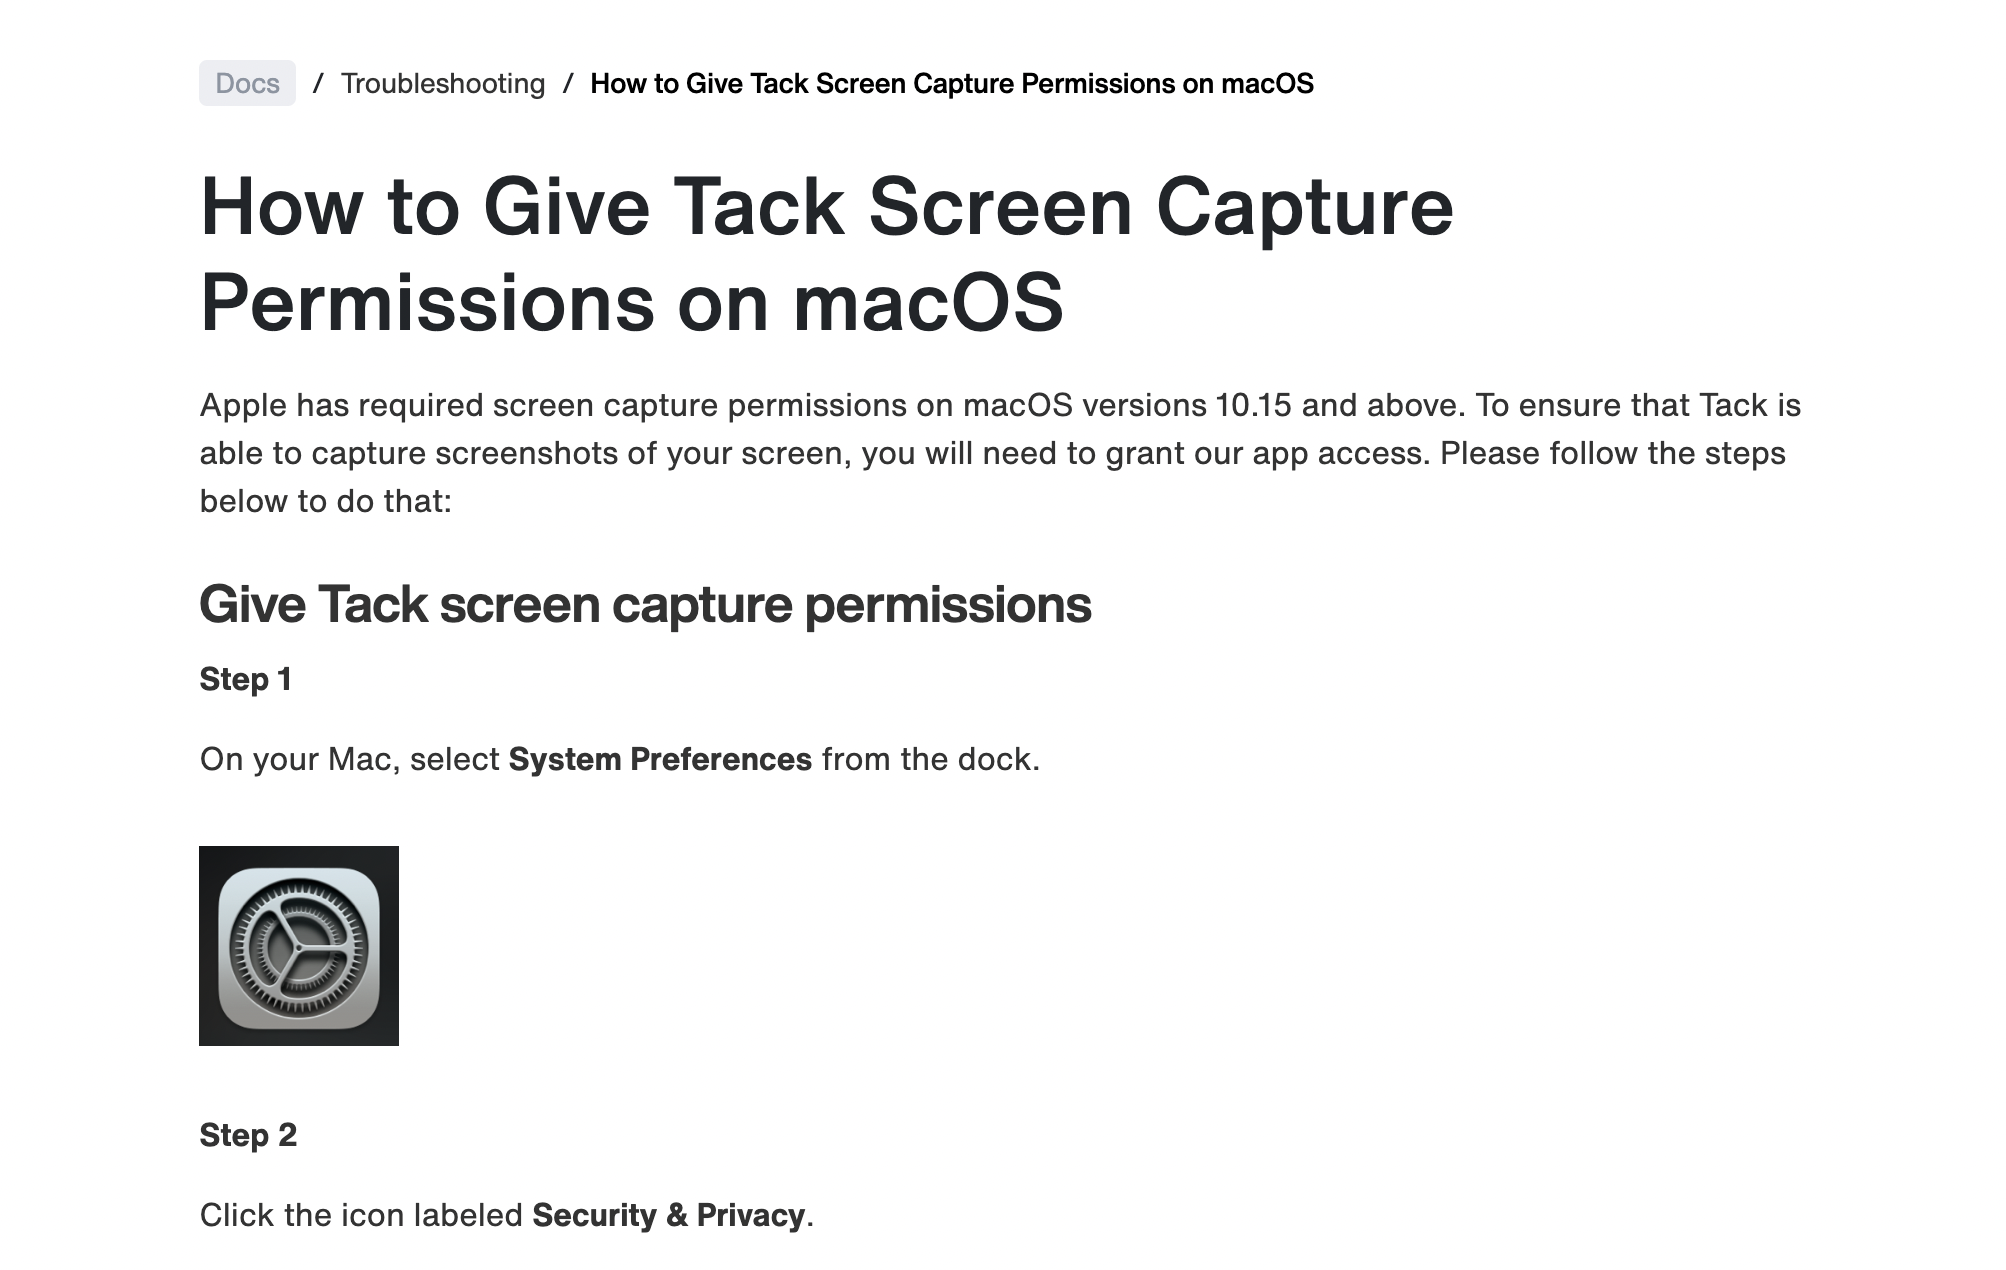 How to Give Tack Screen Capture Permissions on macOS